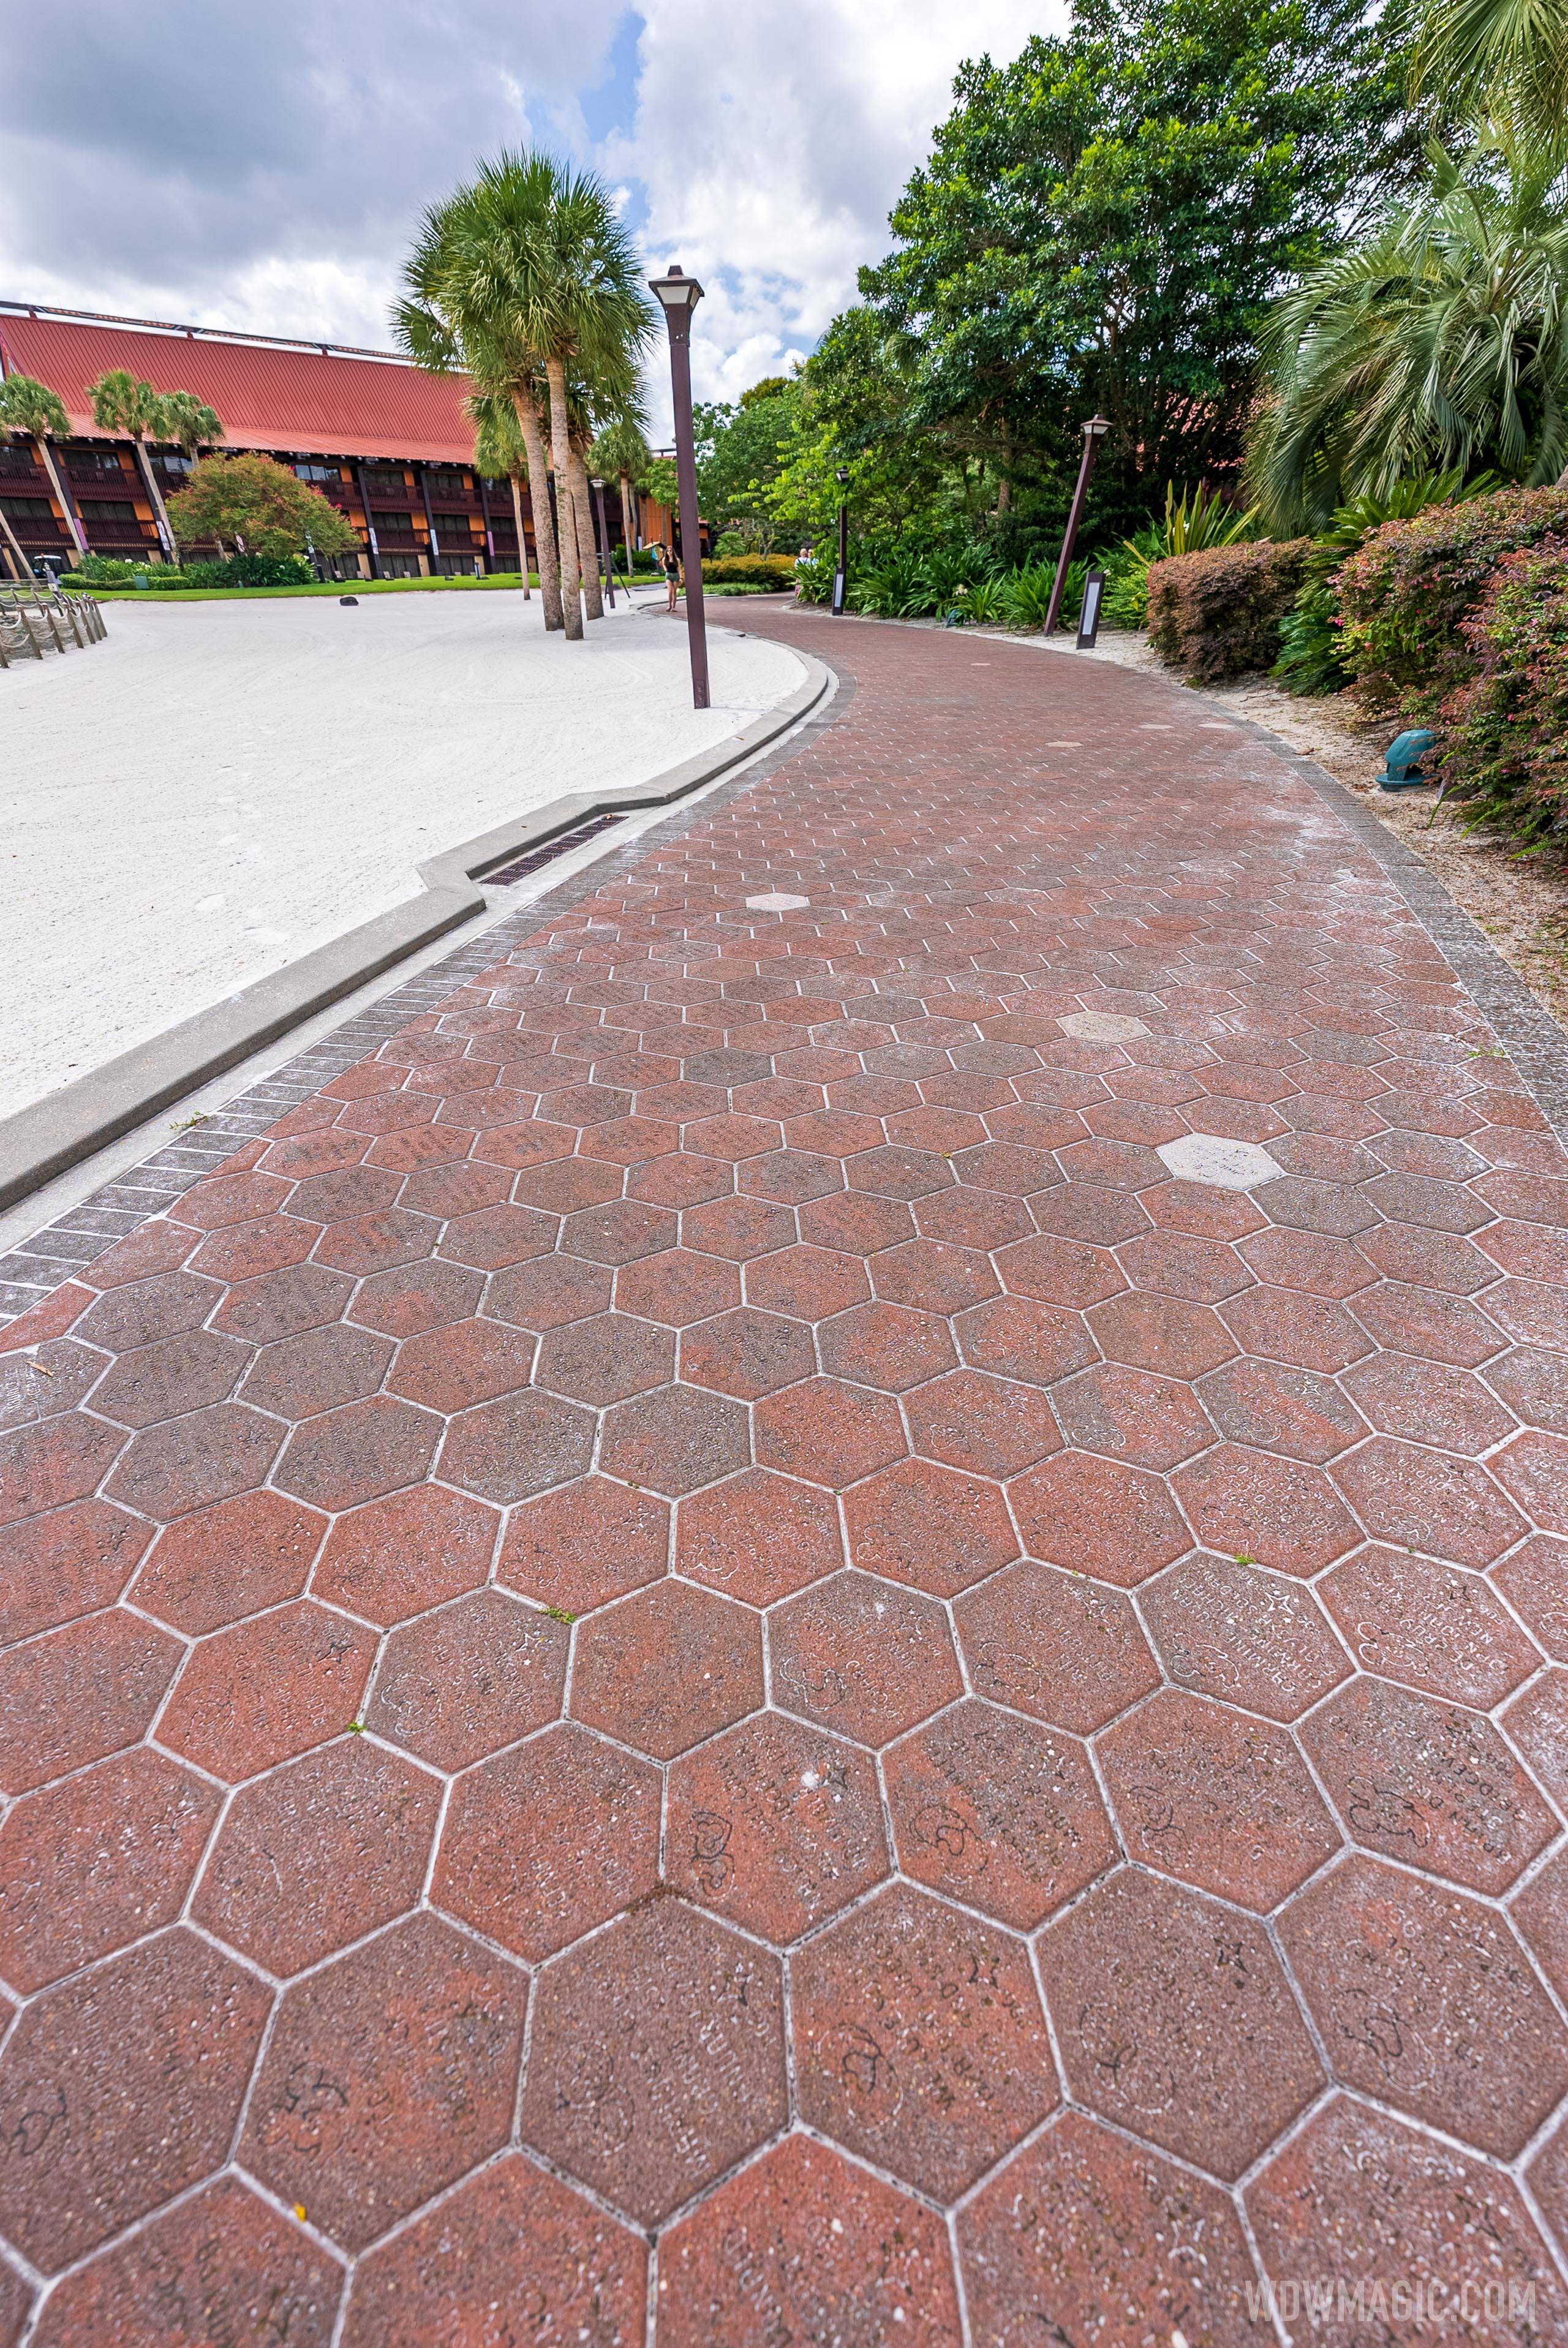 The 'Walk Around the World' bricks are still in place near to the Polynesian